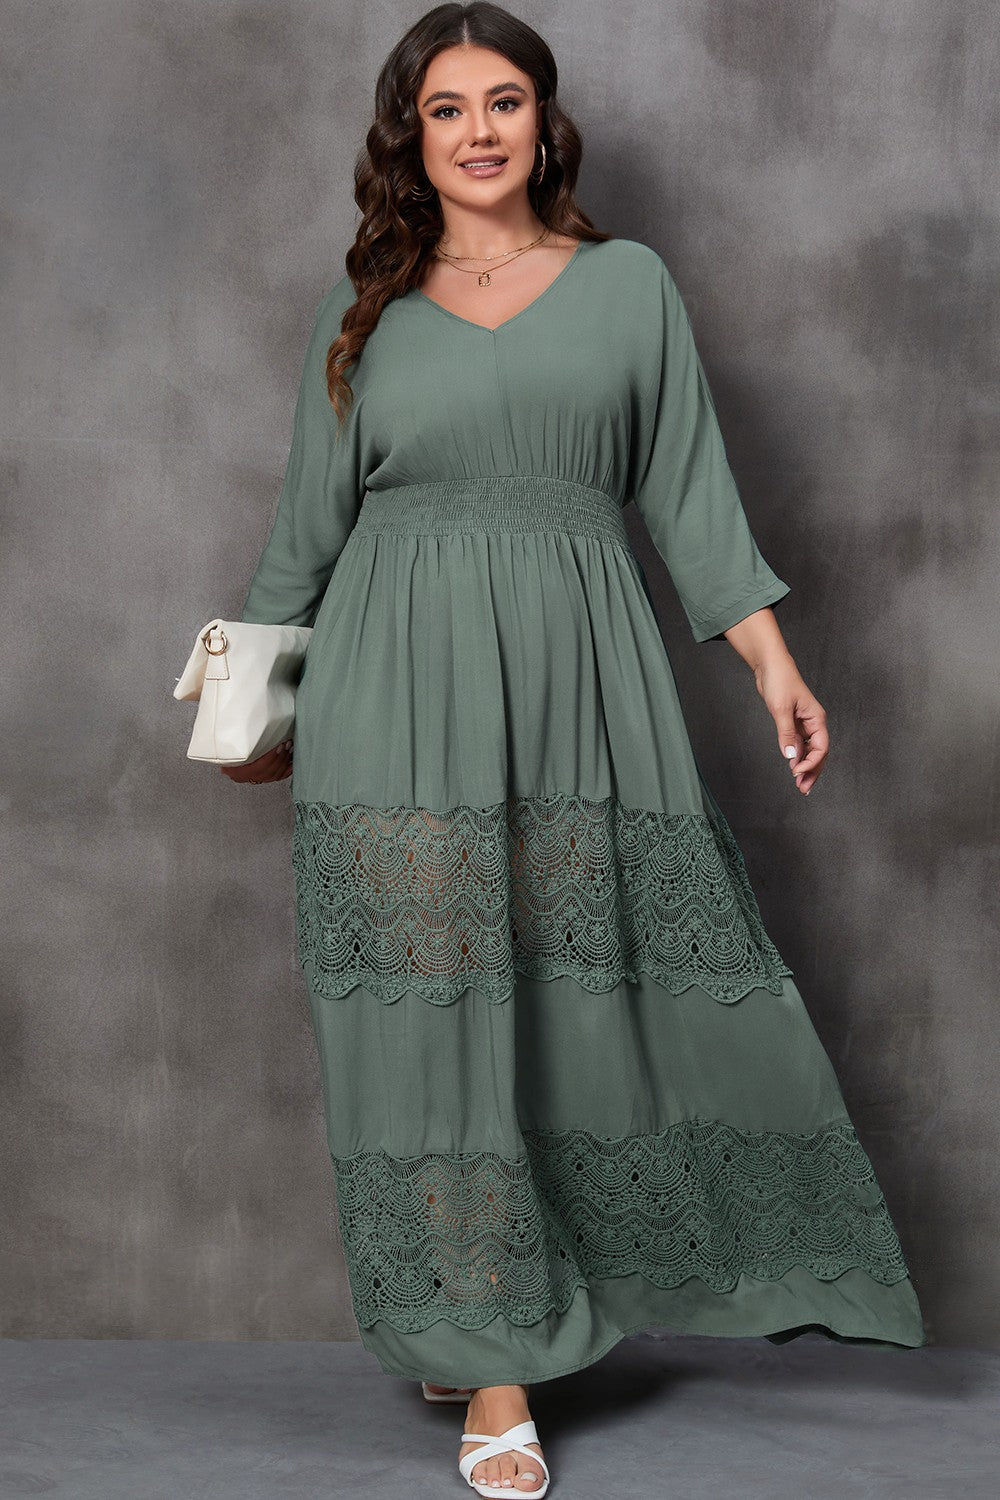 Elegant Plus Size Beach Wedding Guest Dress - Tied V-Neck Smocked Crochet Maxi Dress for a Perfect Seaside Ceremony